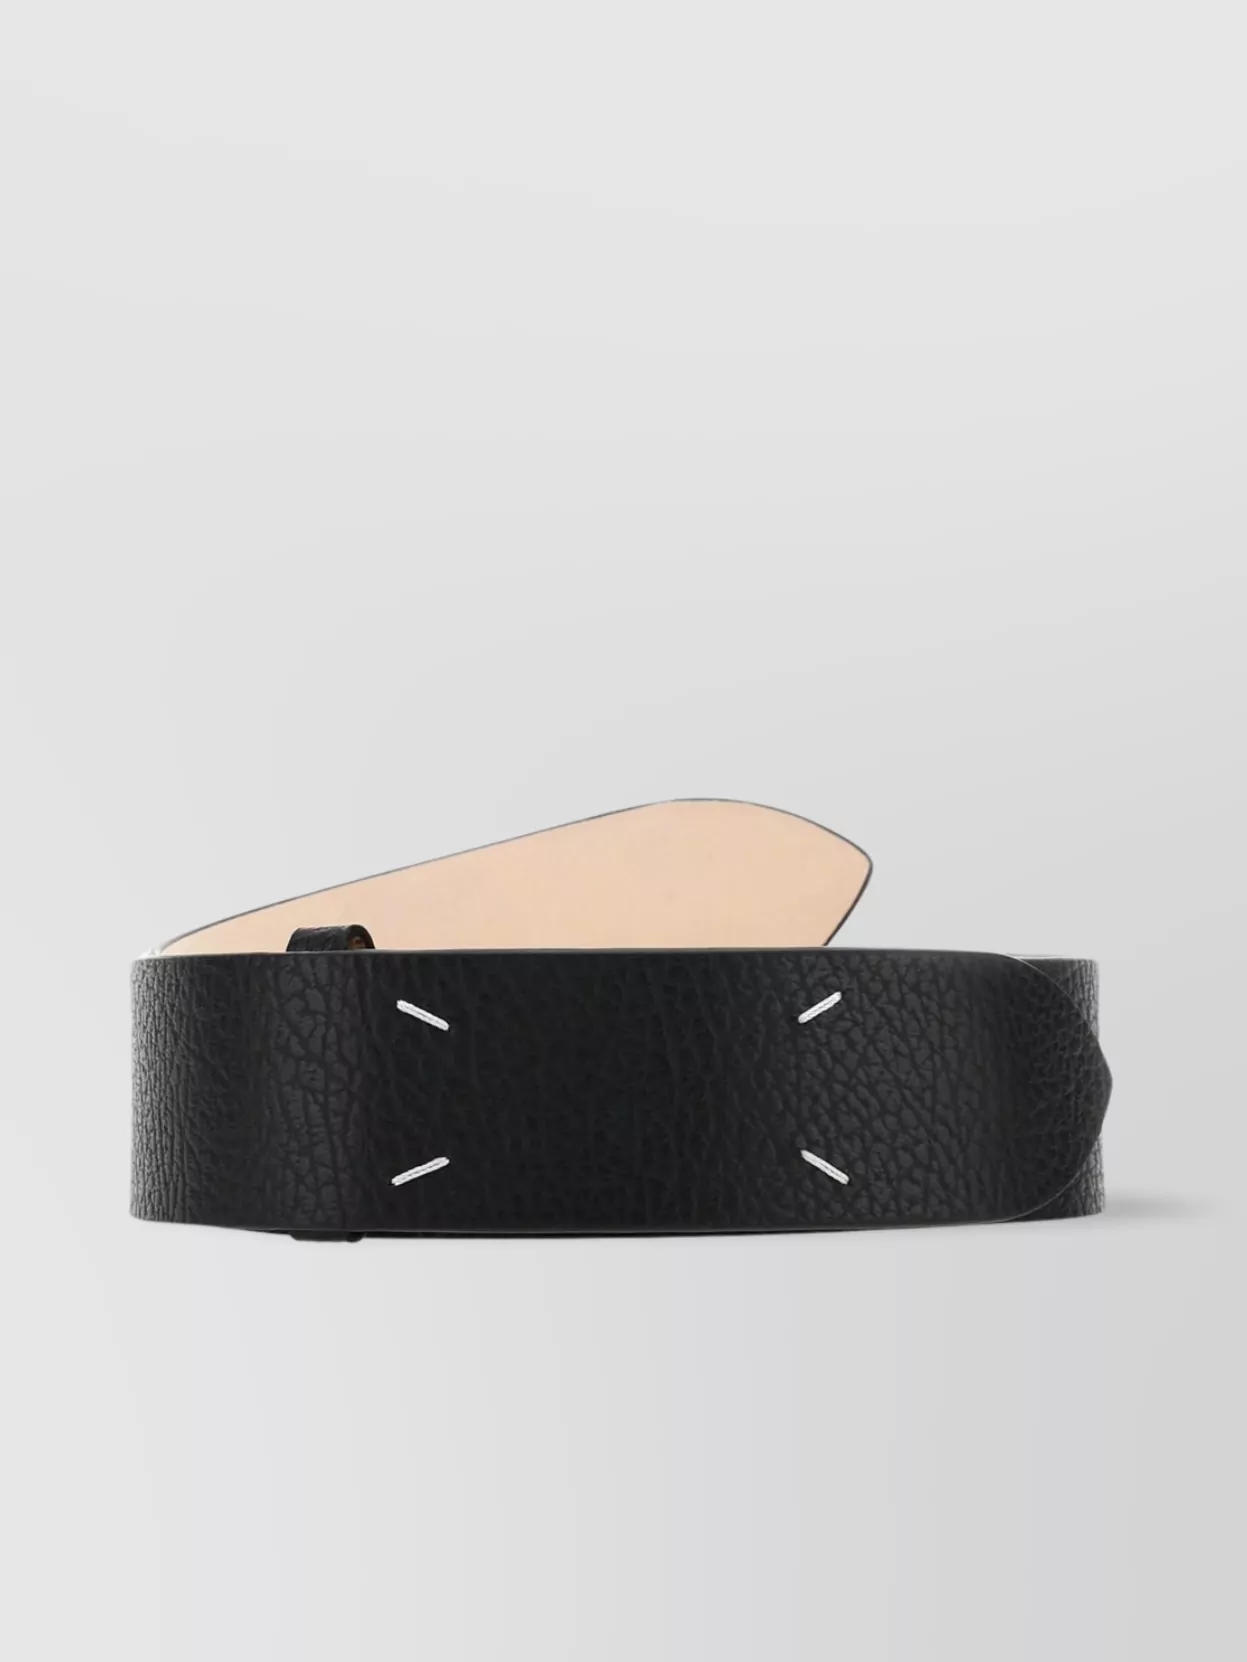 Shop Maison Margiela Leather Belt With Metallic Accents And Punched Holes